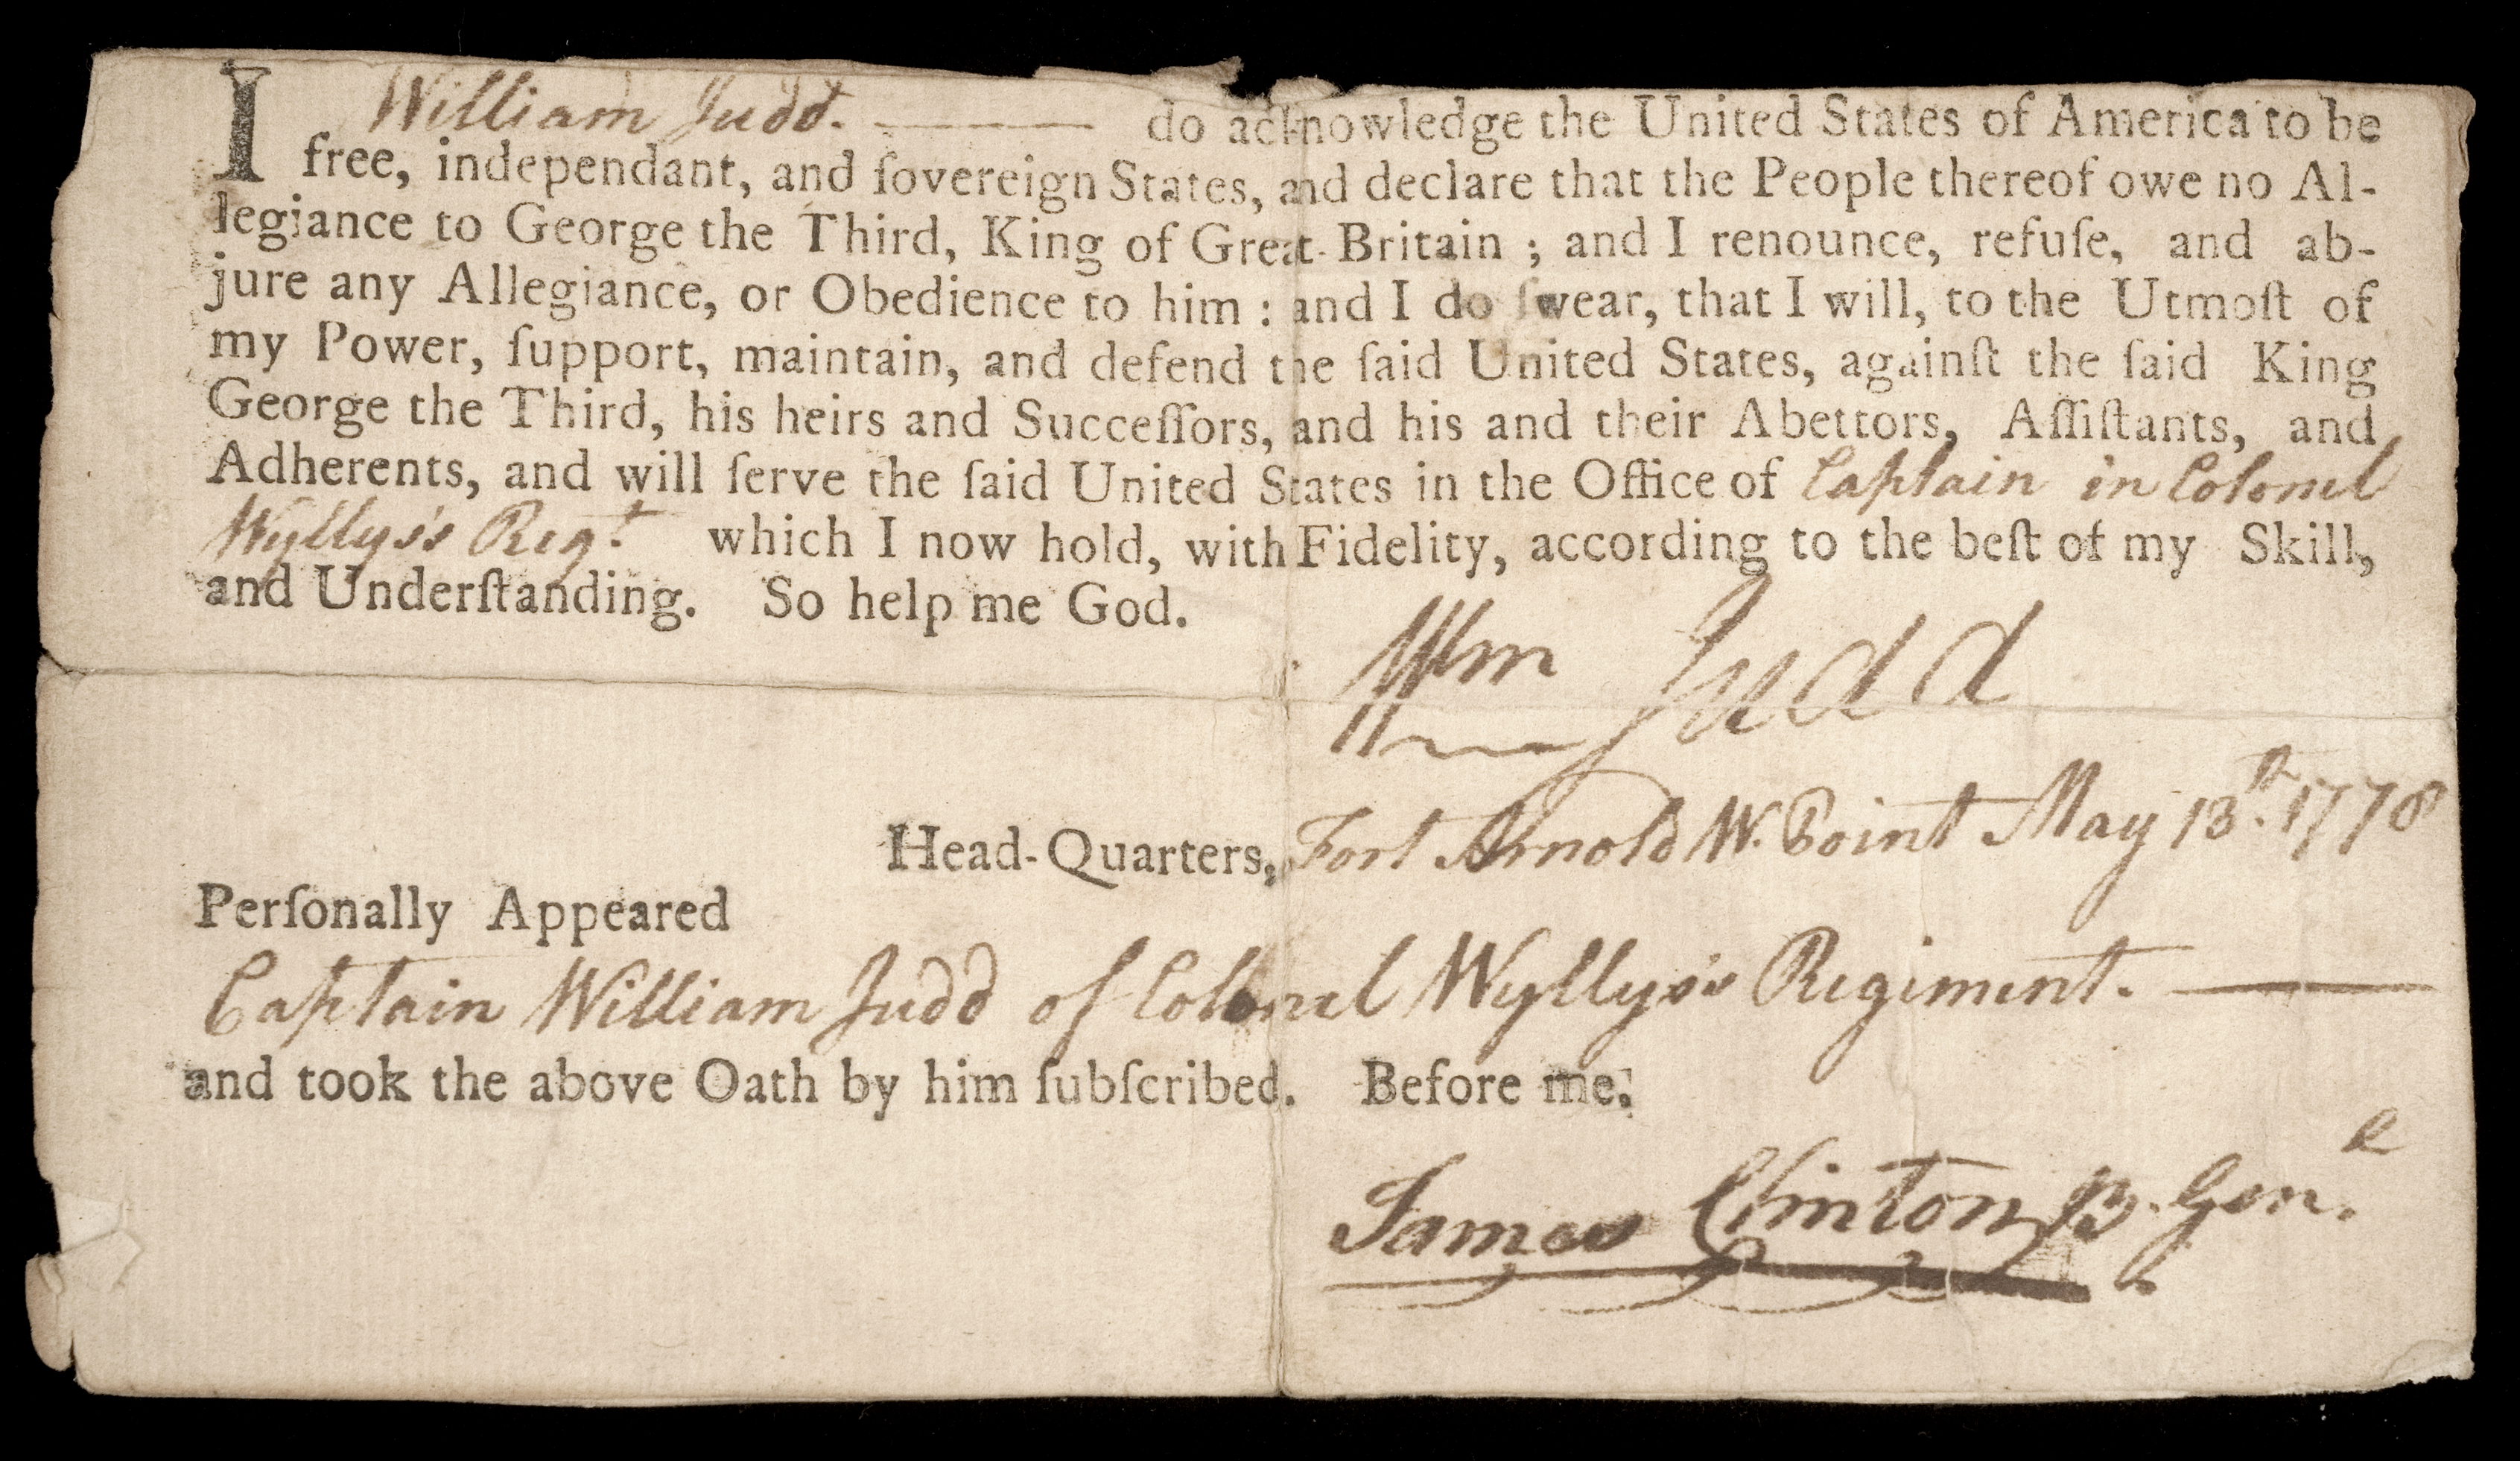 Oath of allegiance to the United States, May 13, 1778